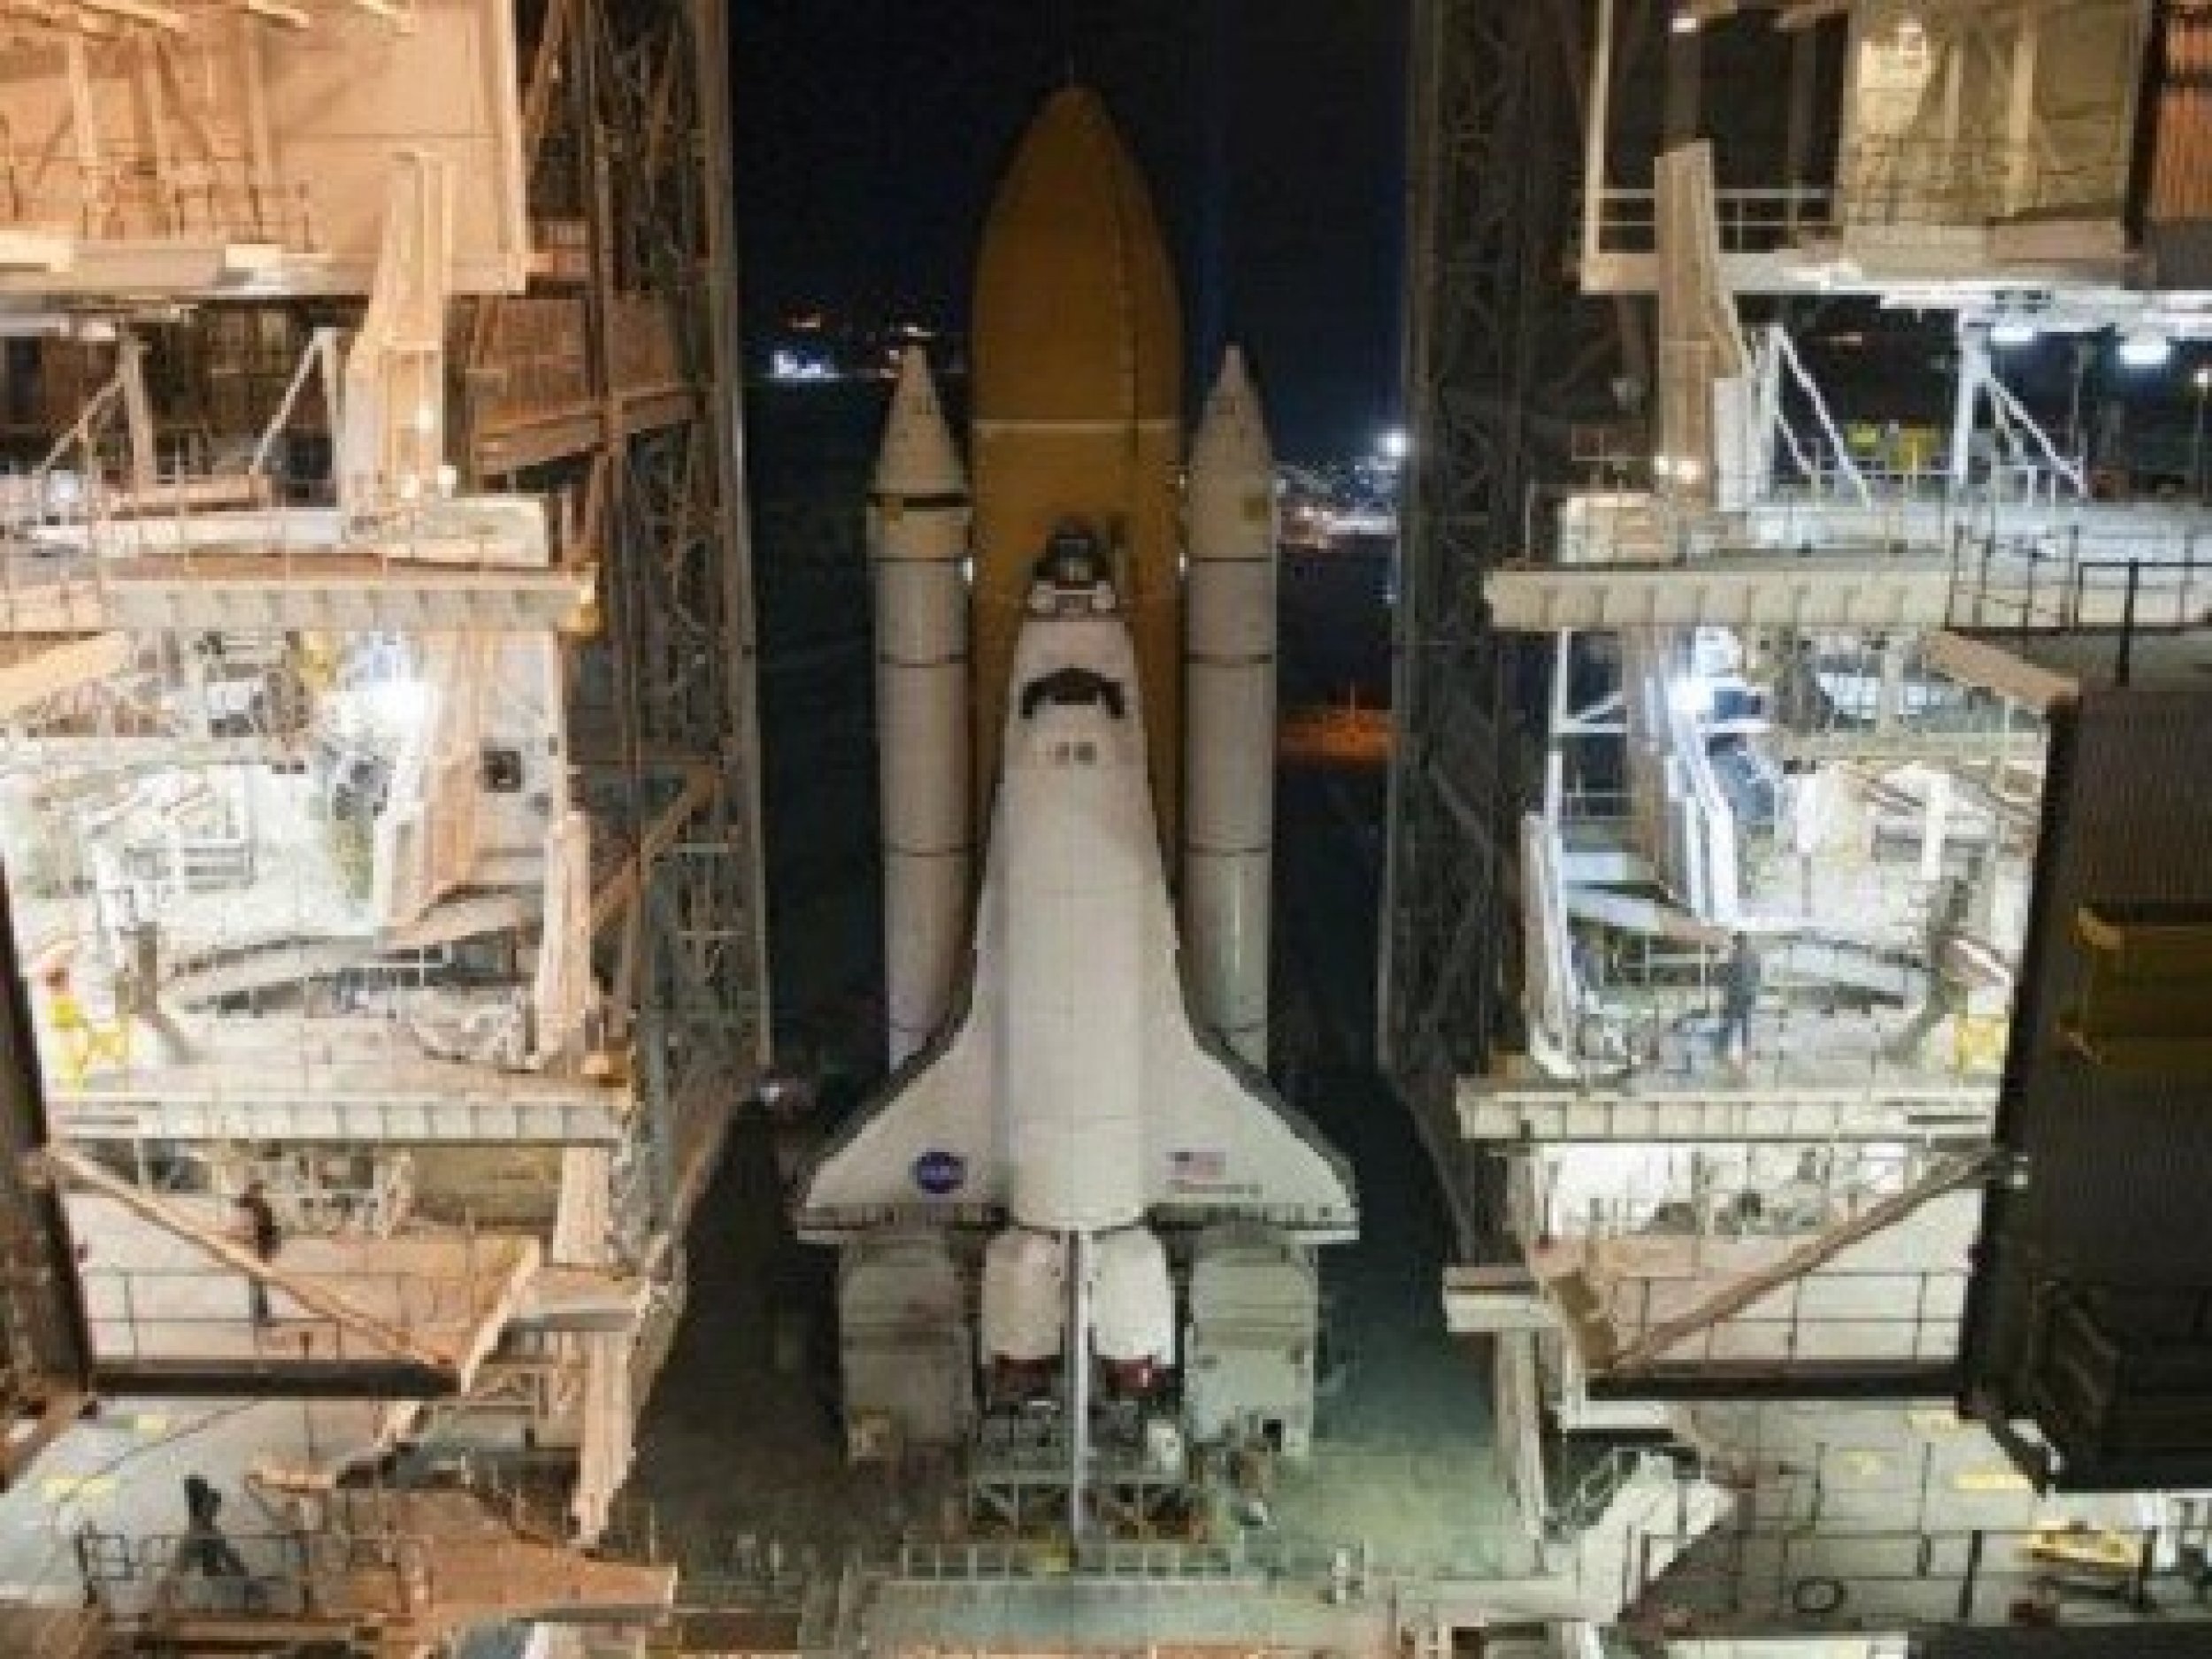 Discovery Returns to the Launch Pad